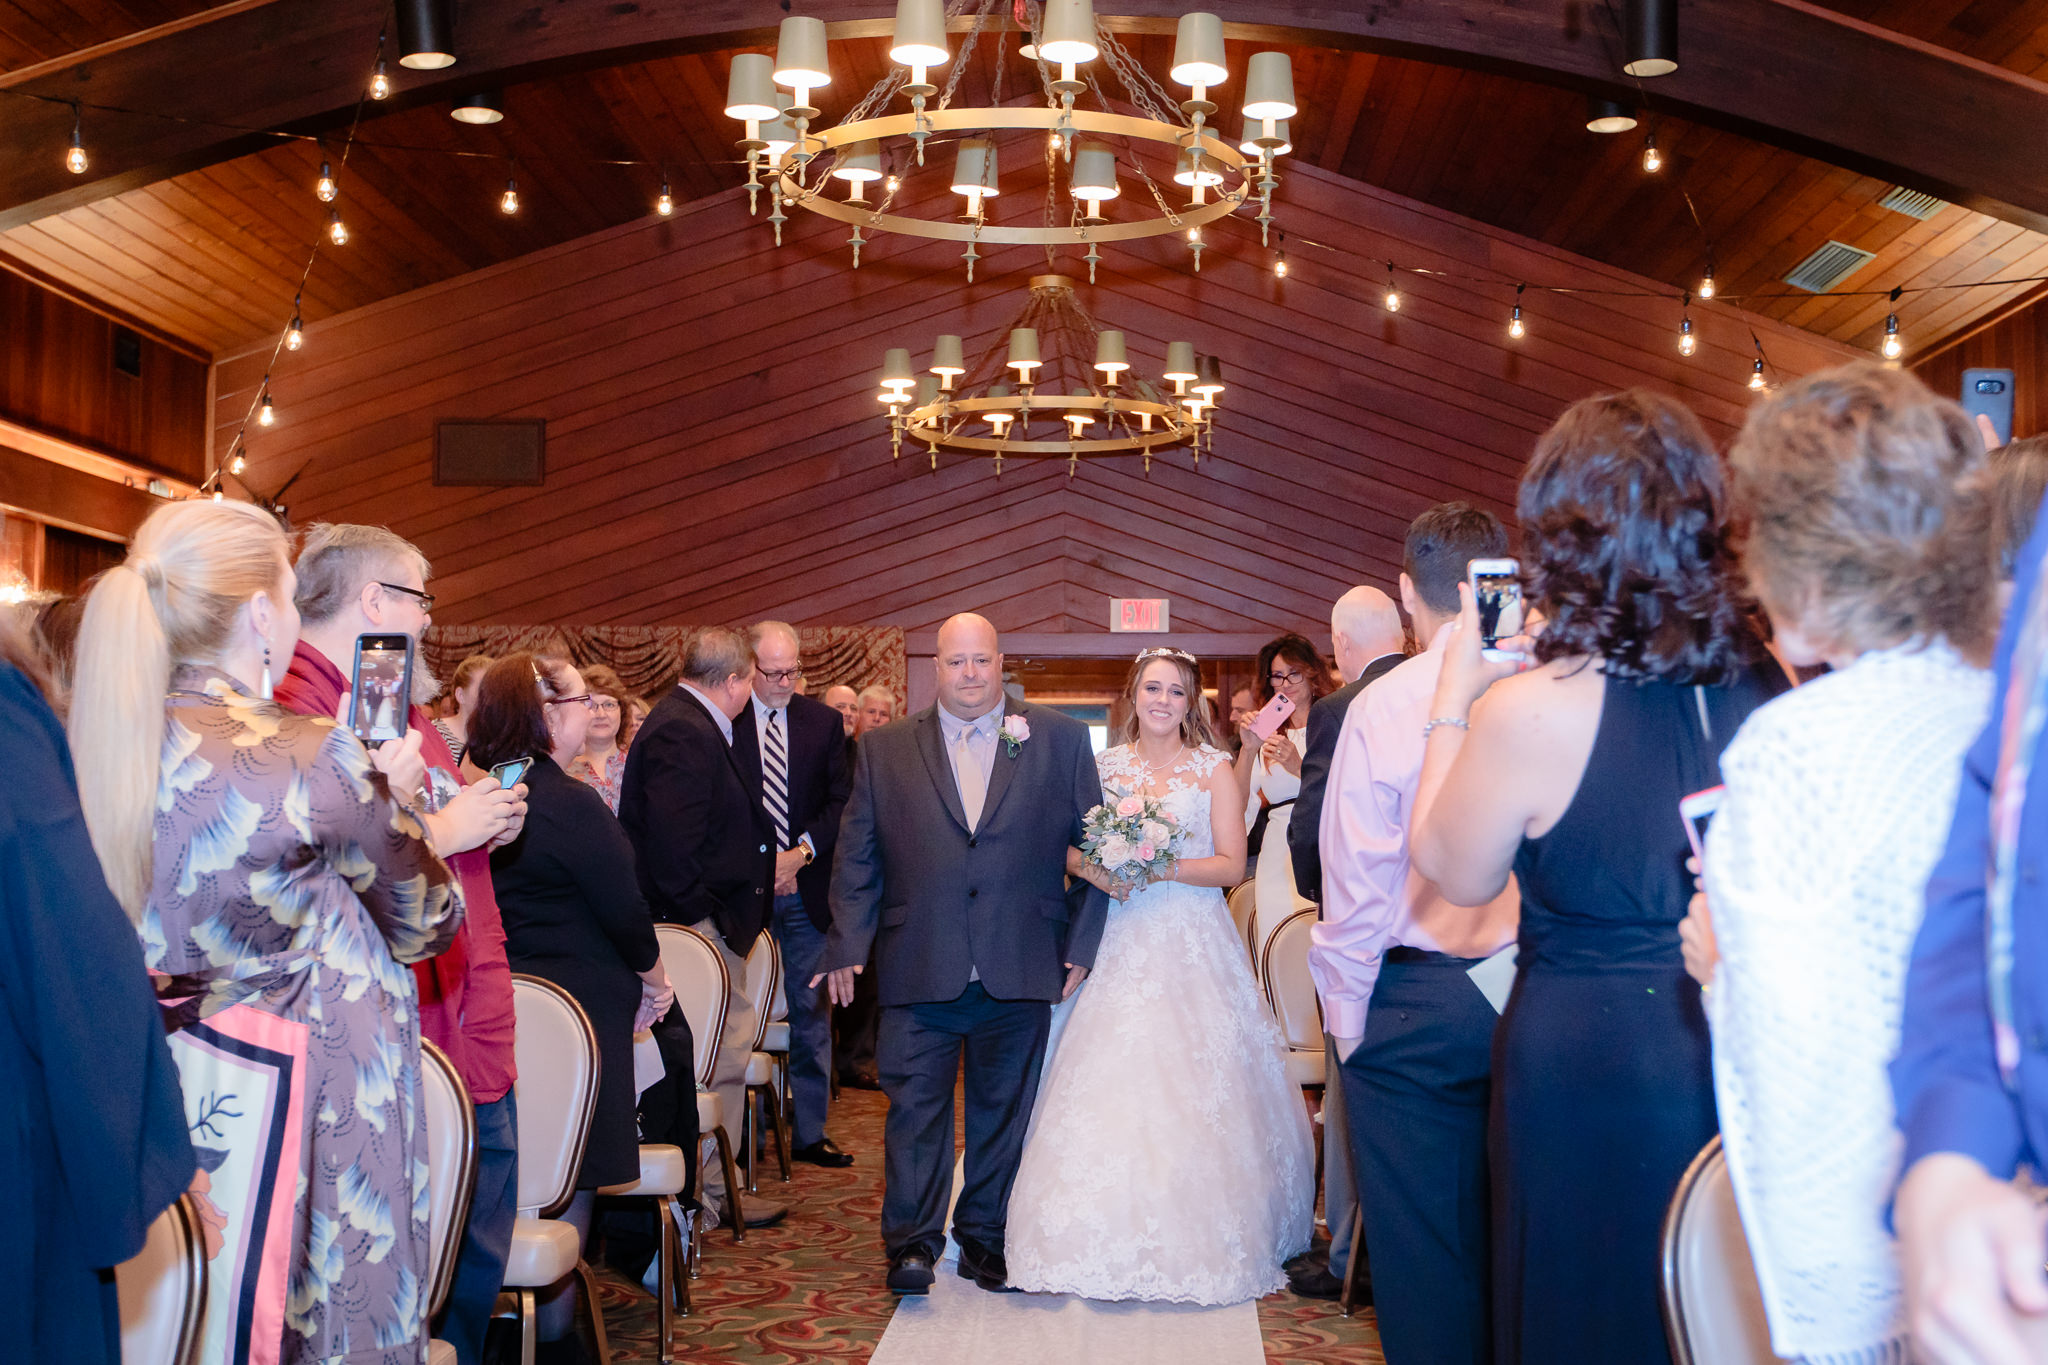 Father of the bride walks his daughter down the aisle at Oglebay